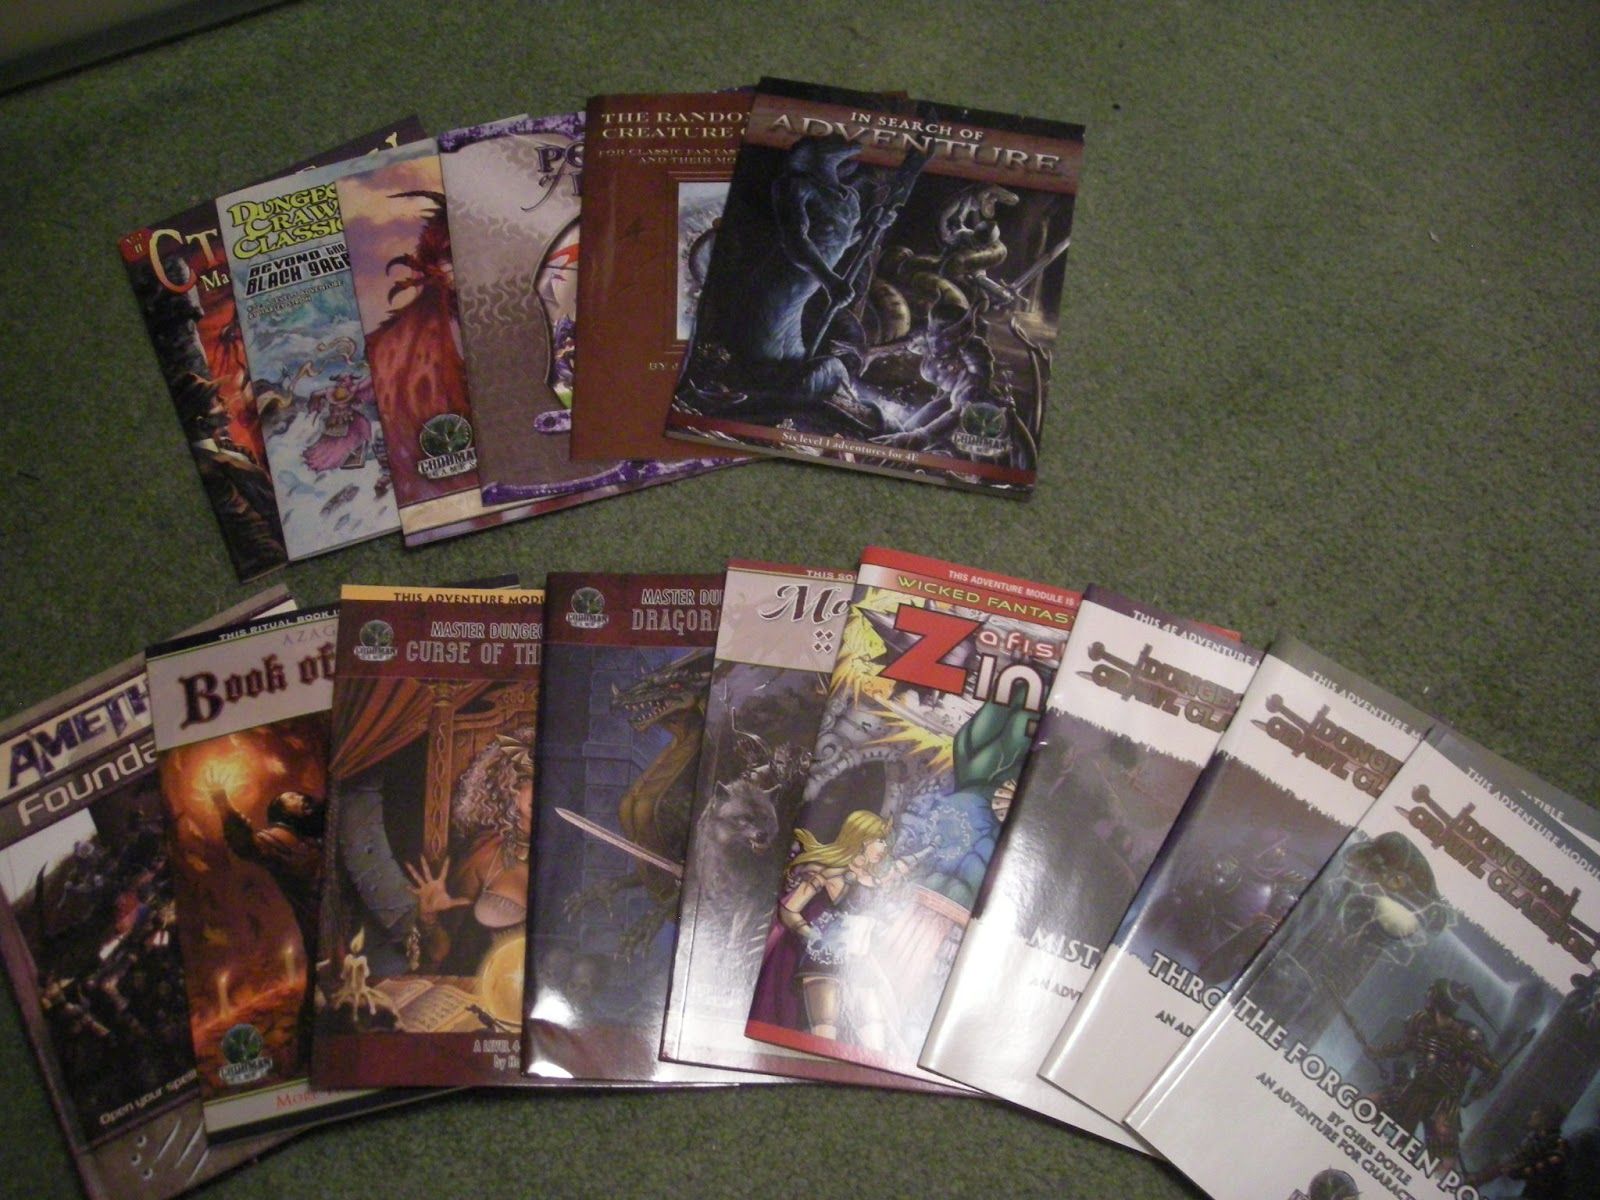 Two rows of letter-sized paperback RPG supplements, spread out on a green carpet.